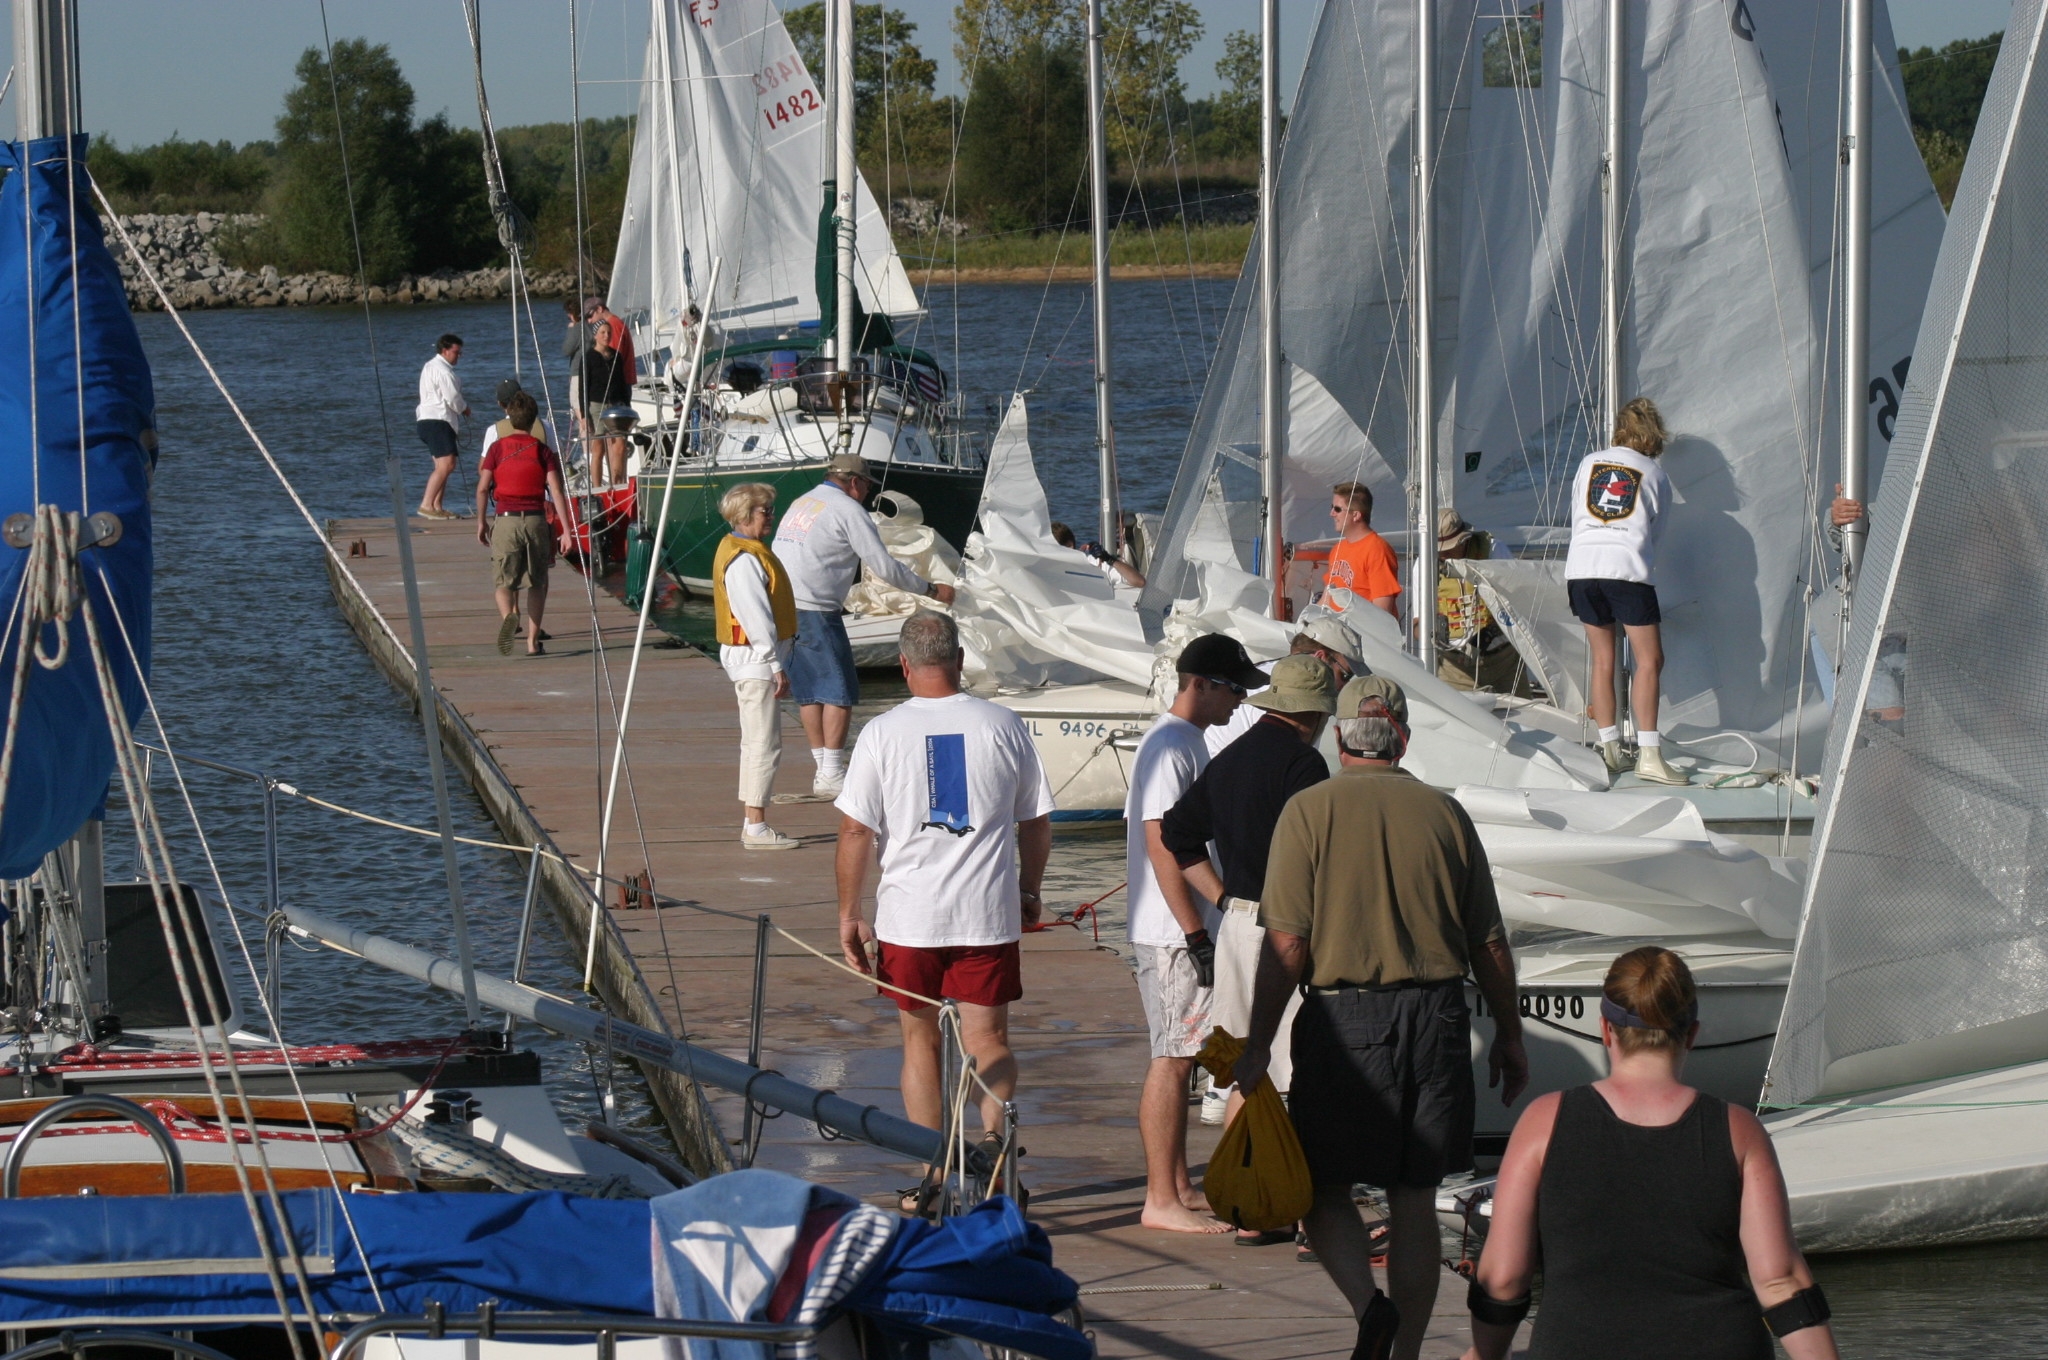 Try Sailing Day with Carlyle Sailing Association